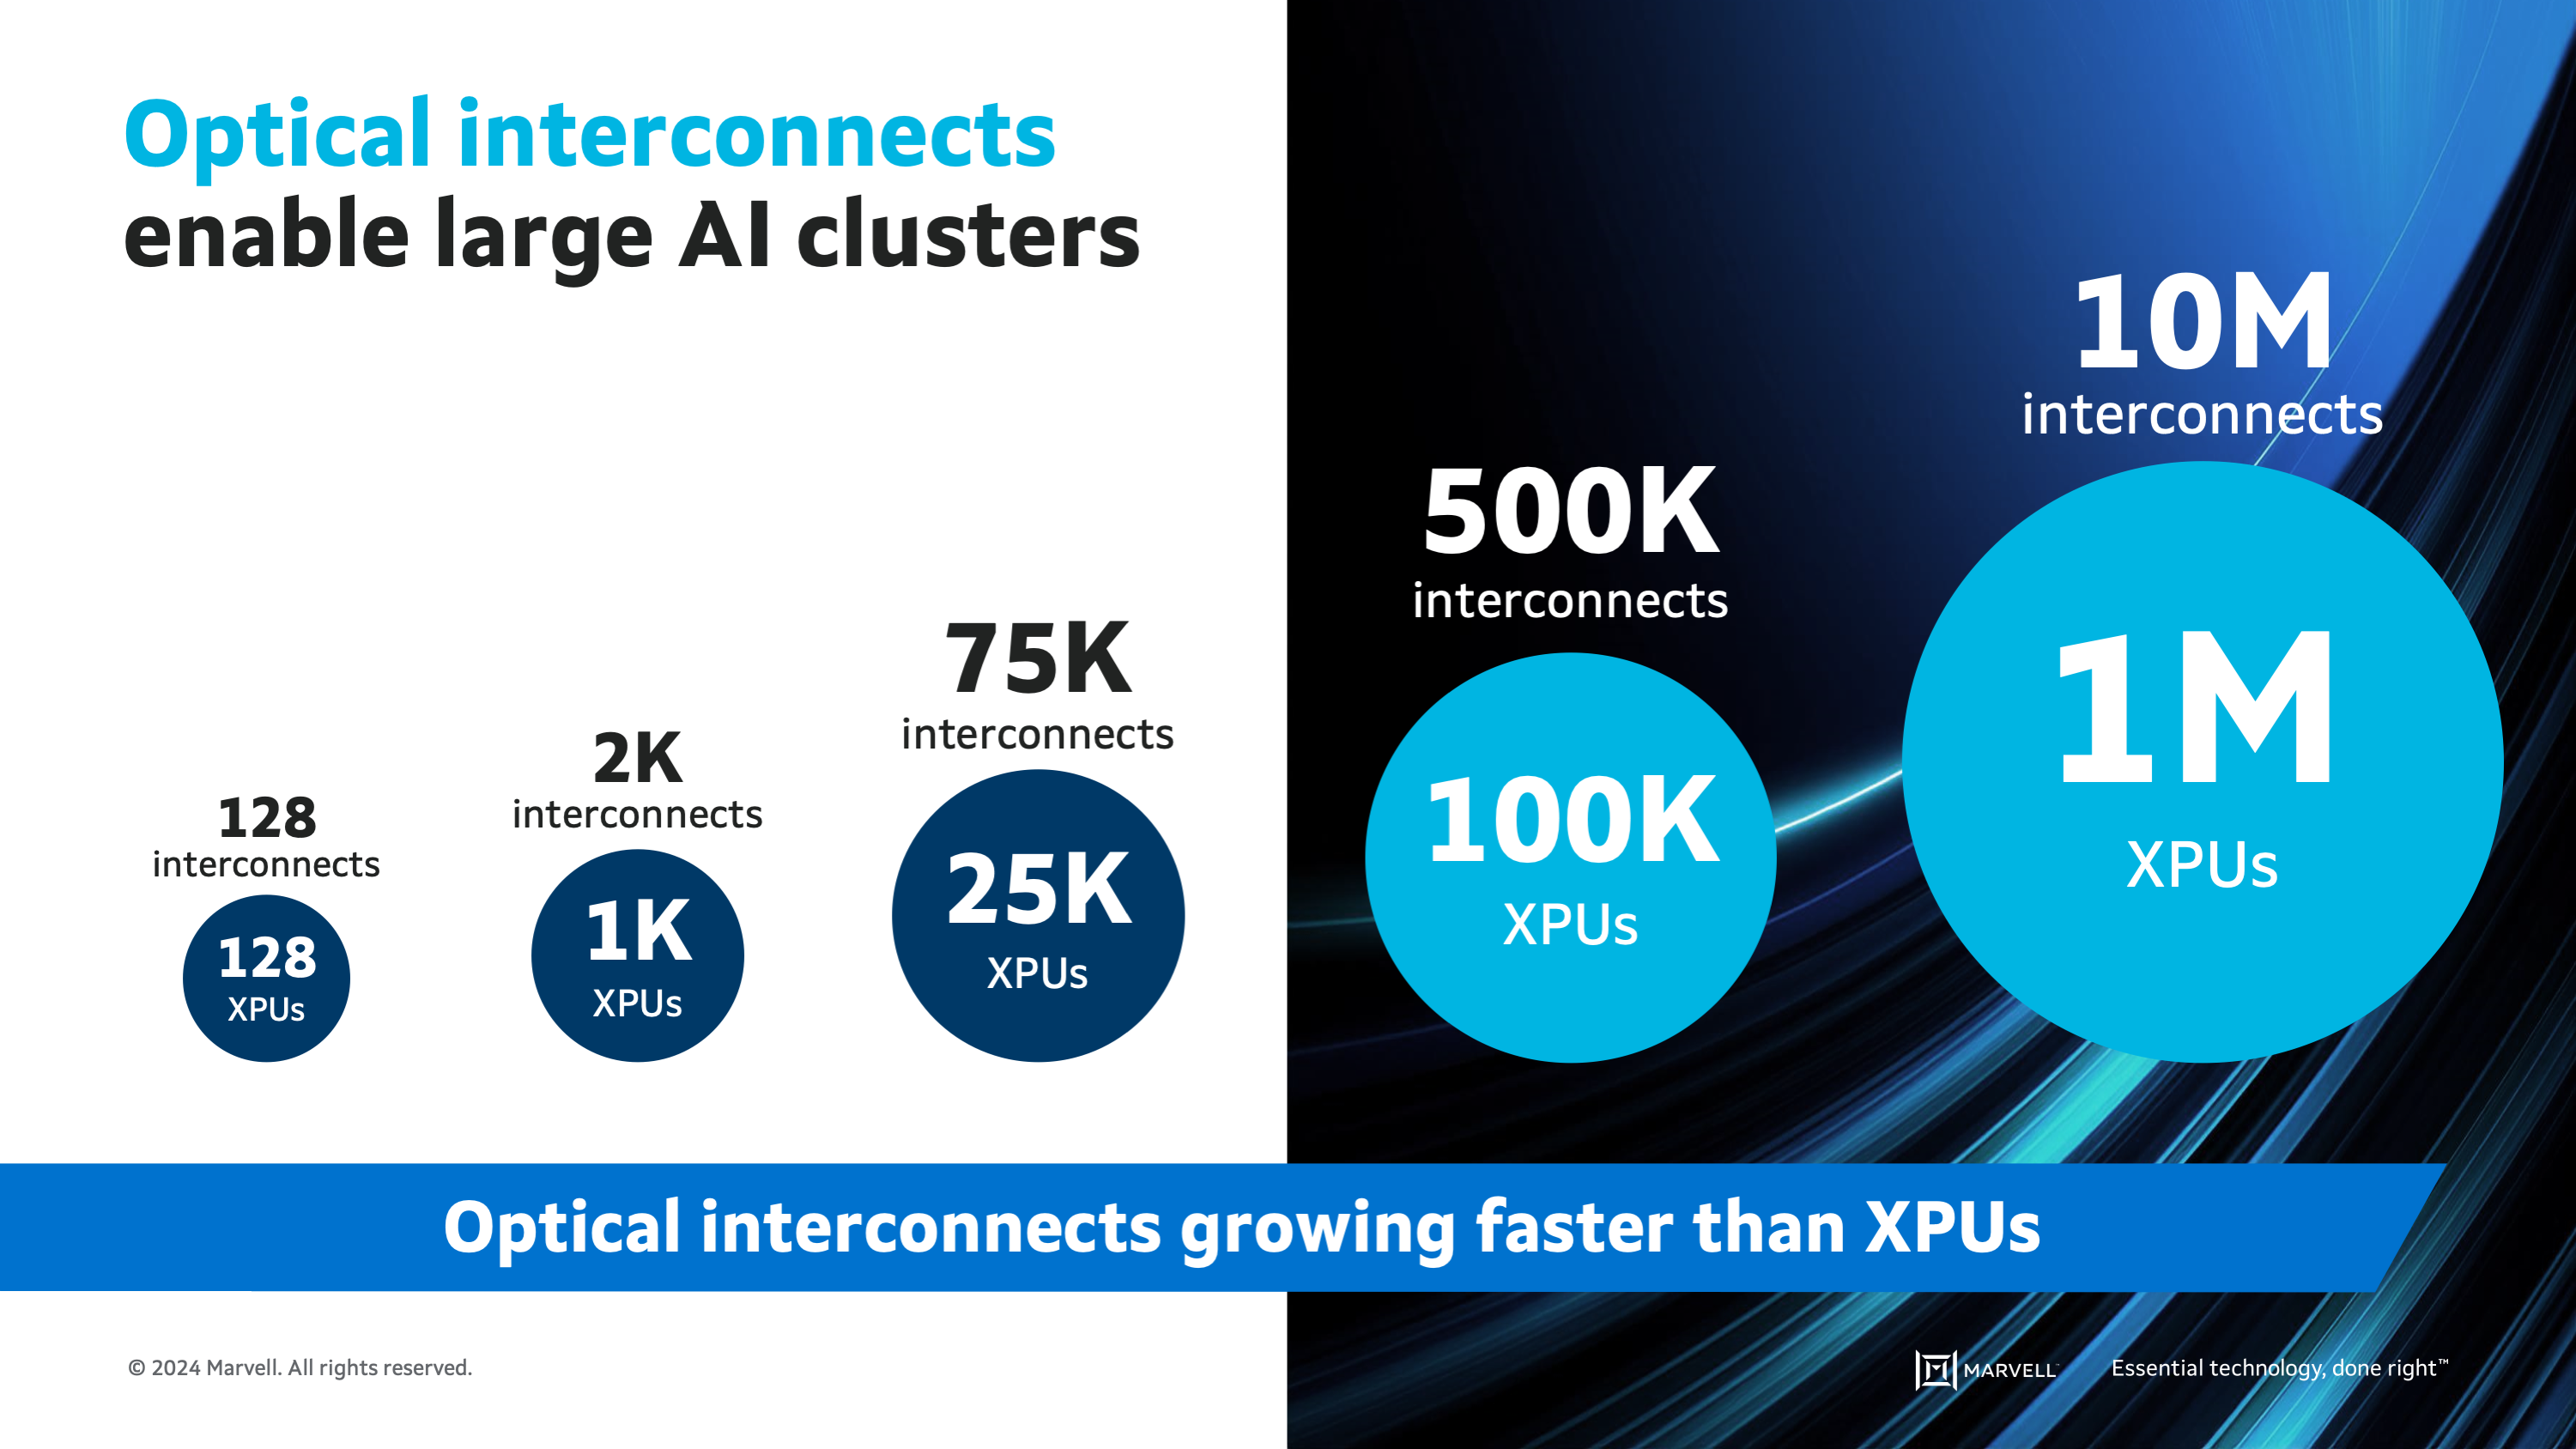 Optical interconnects enable large AI clusters